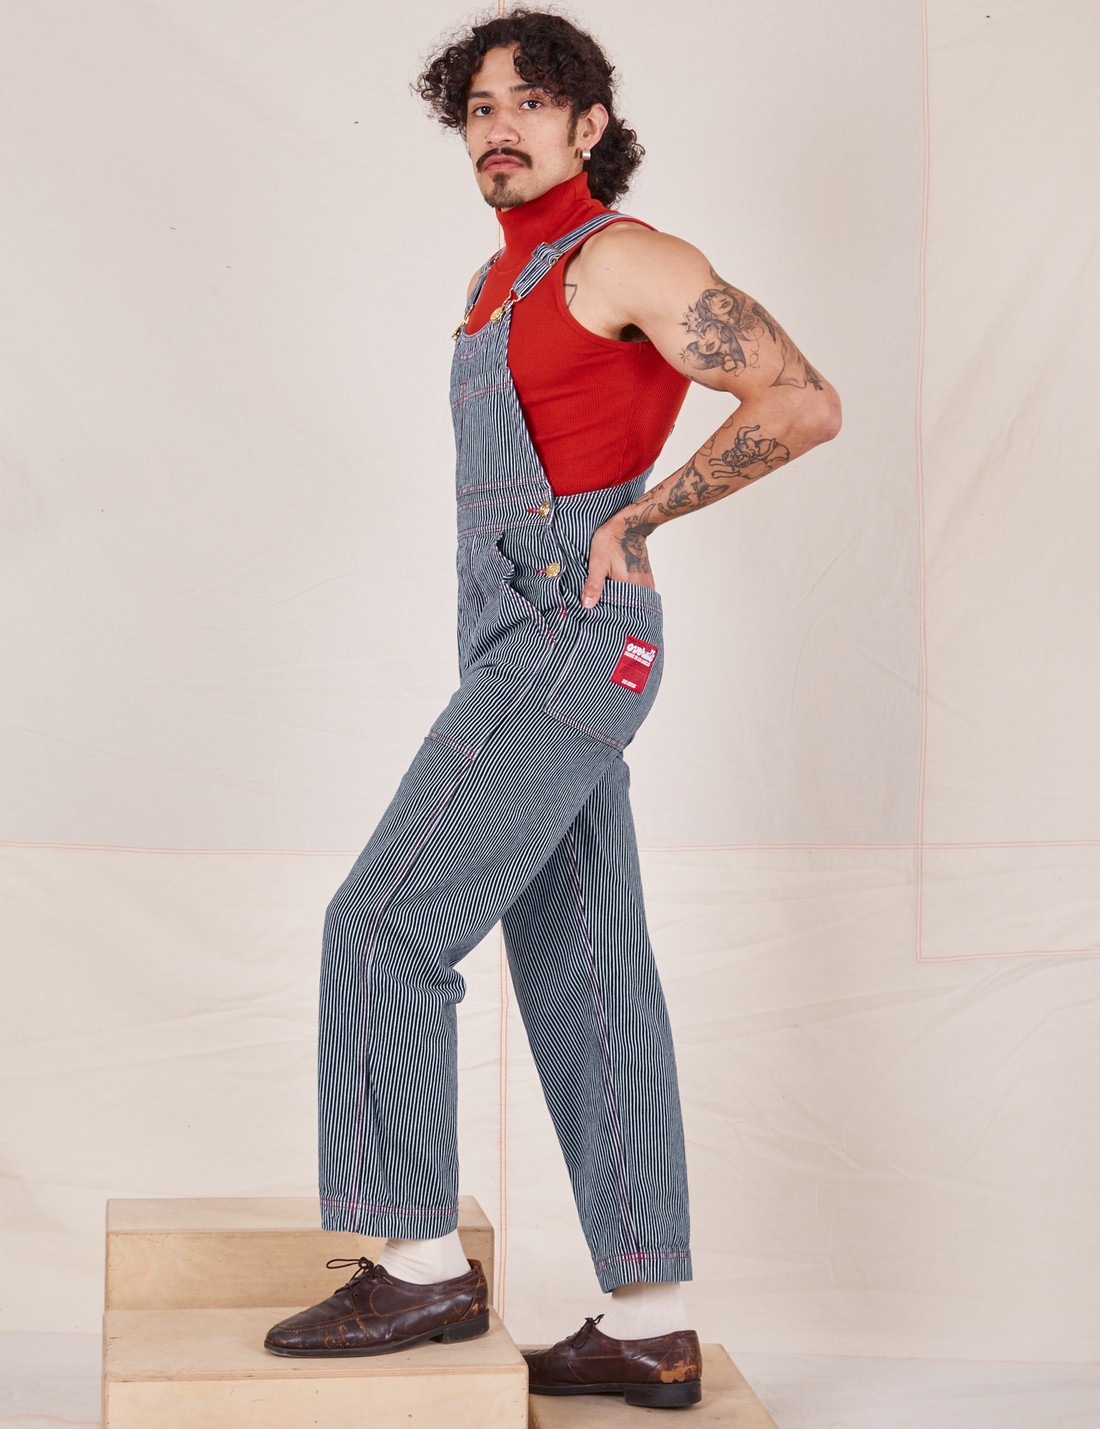 Side view of Railroad Stripe Denim Original Overalls and paprika Sleeveless Turtleneck worn by Jesse. They have their hand in the back pocket